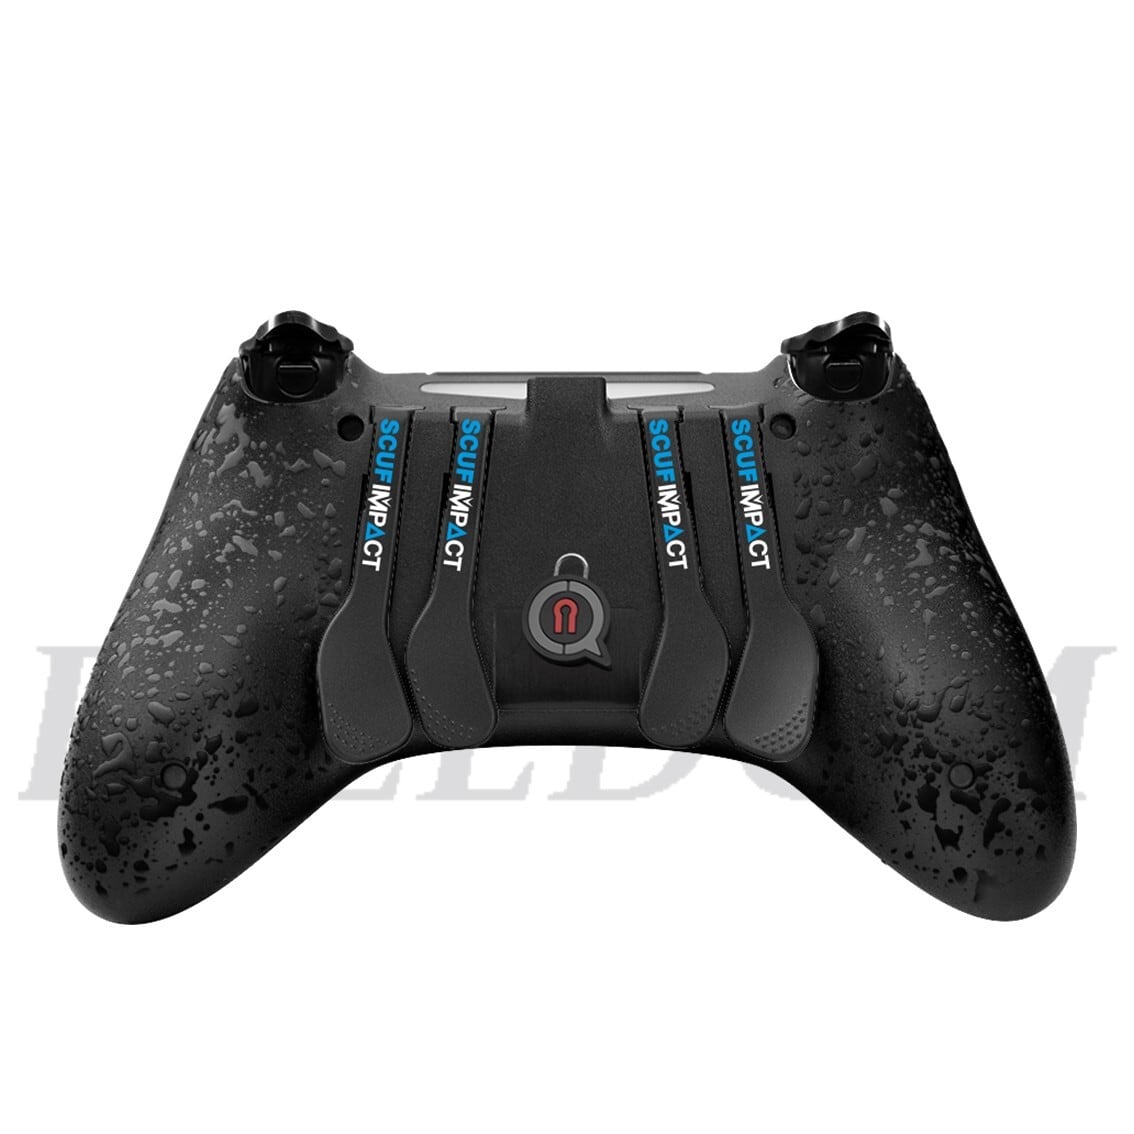 【Knights Of Scuf】 SCUF IMPACT スカフ インパクト フルカスタム品 | SCUF販売 FREEDOM powered by  BASE